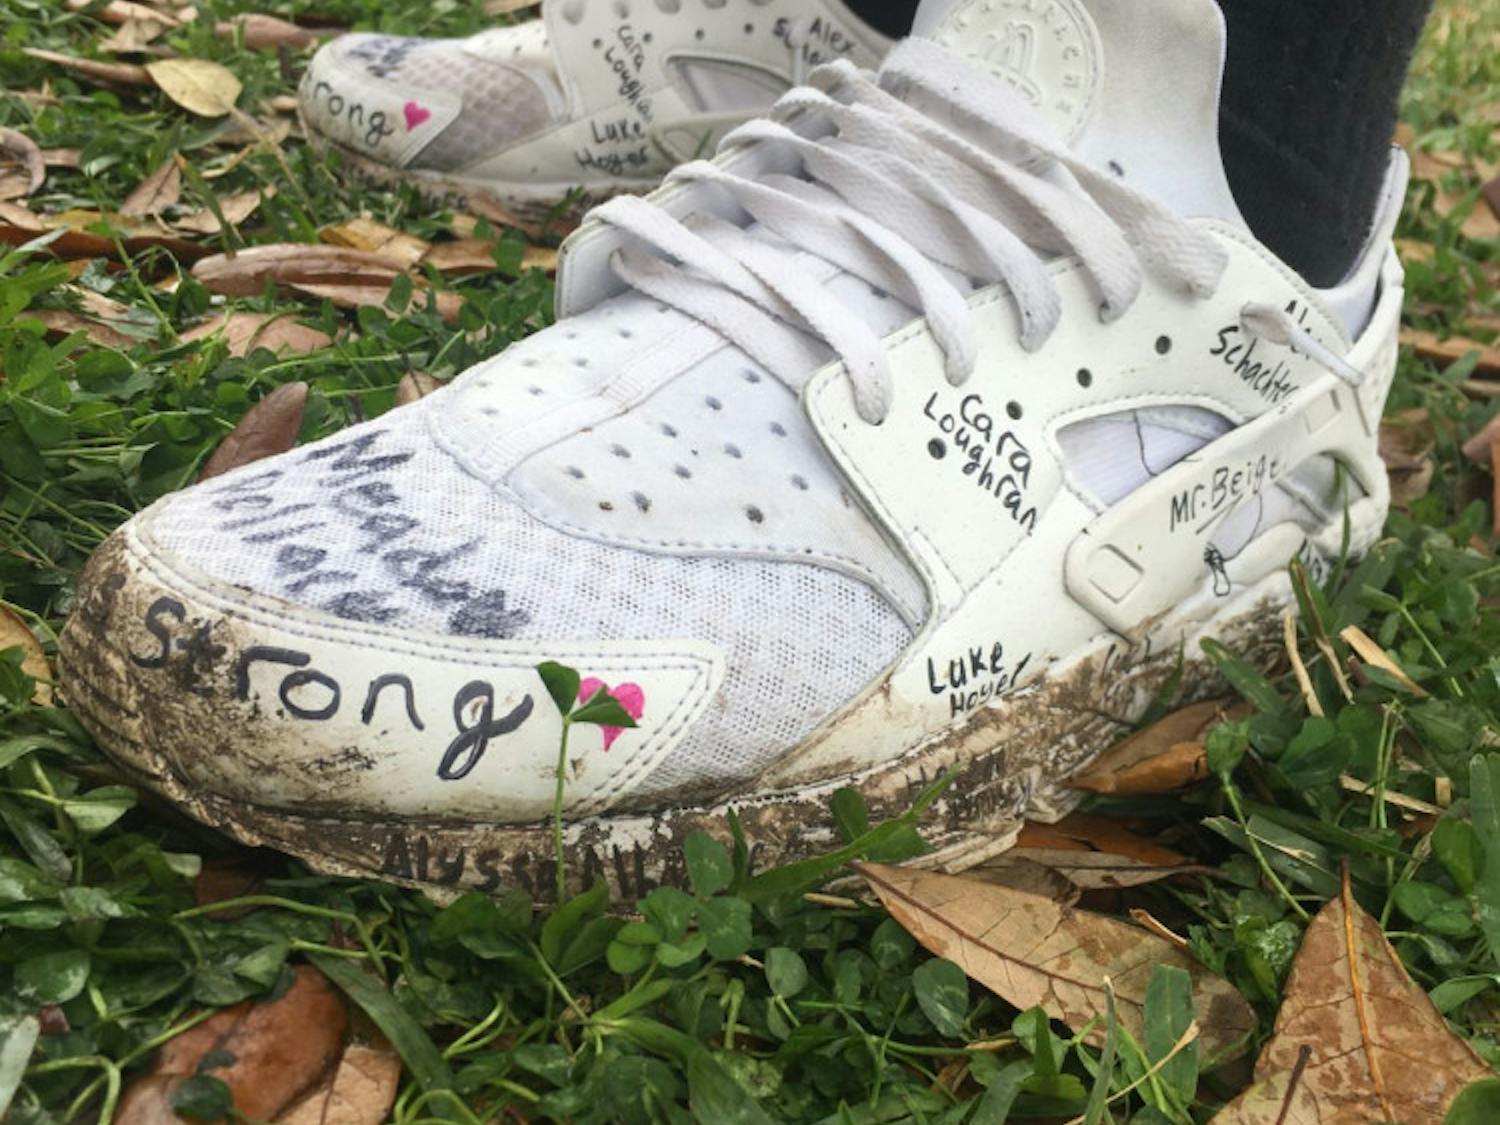 Zachary Randolph, a 15-year-old sophomore at Stoneman Douglas, wore&nbsp;white tennis shoes that had the names of all 17 victims around them and an “NC” scribbled on the sole to represent Nikolas Cruz. Randolph said he was there for Jamie Guttenberg, a 14-year-old who died at the shooting.&nbsp;
&nbsp;